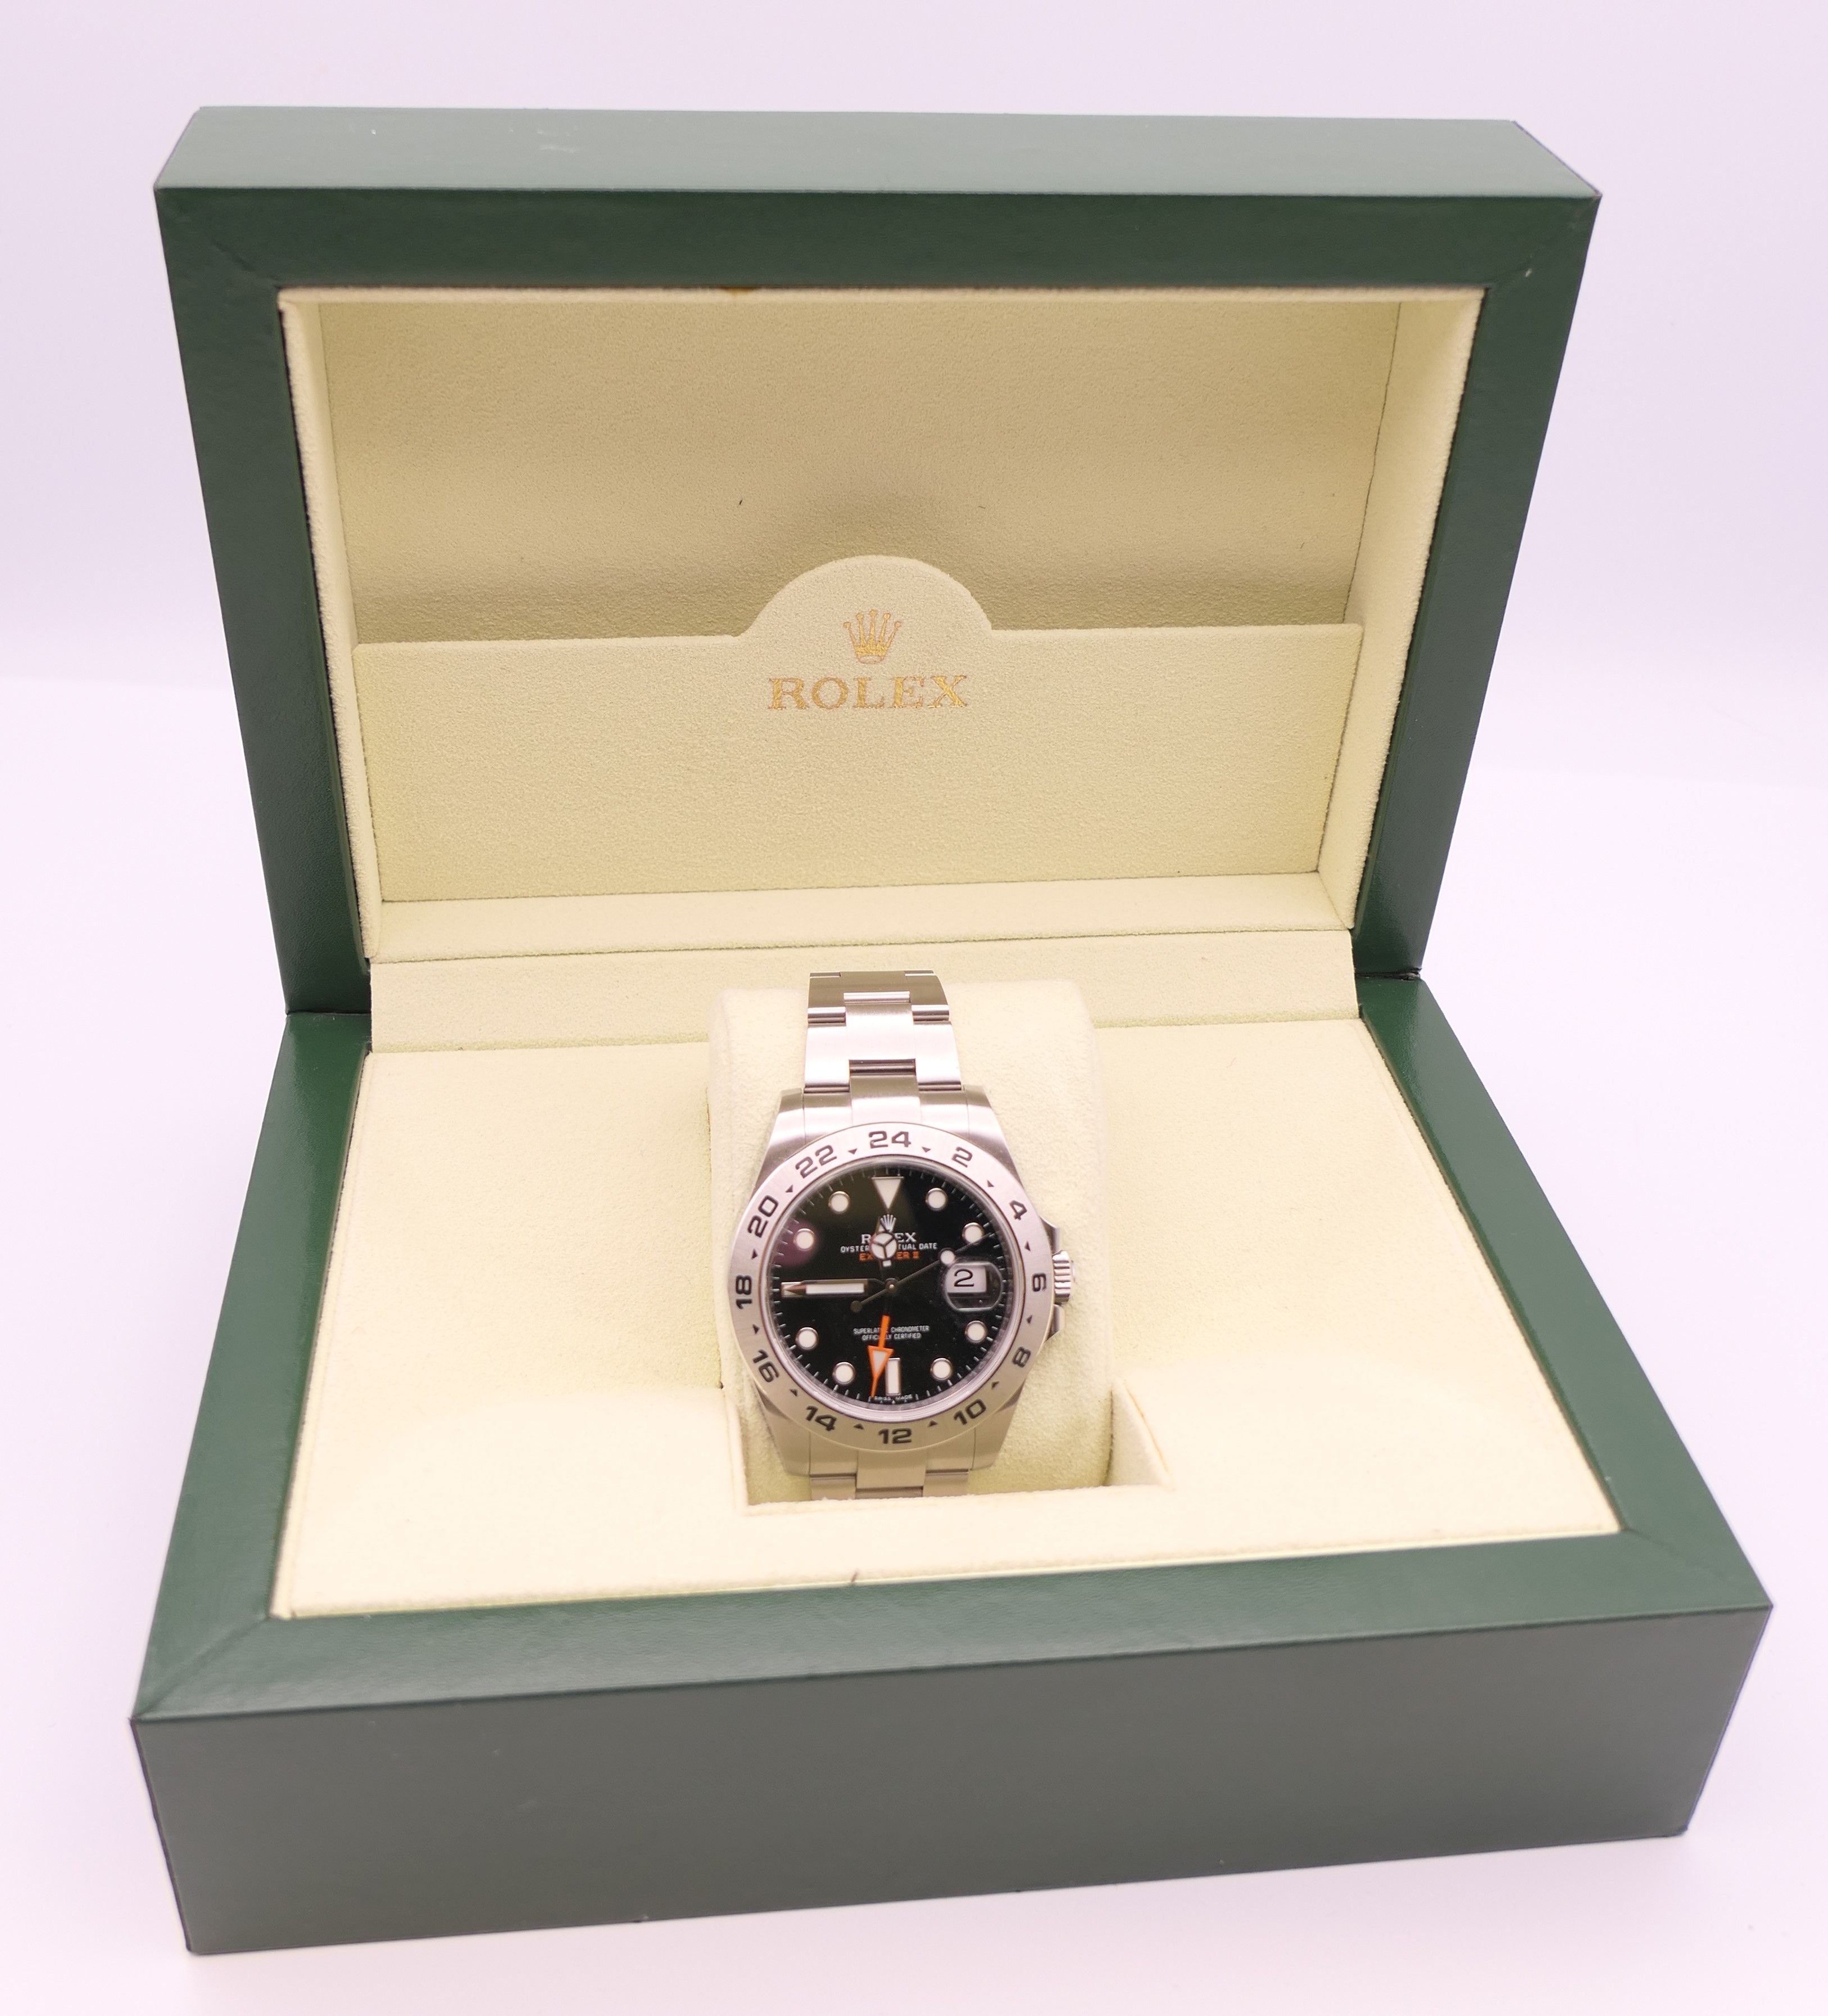 A Rolex Perpetual Date Explorer II watch with black dial, model number 216570, - Image 2 of 13